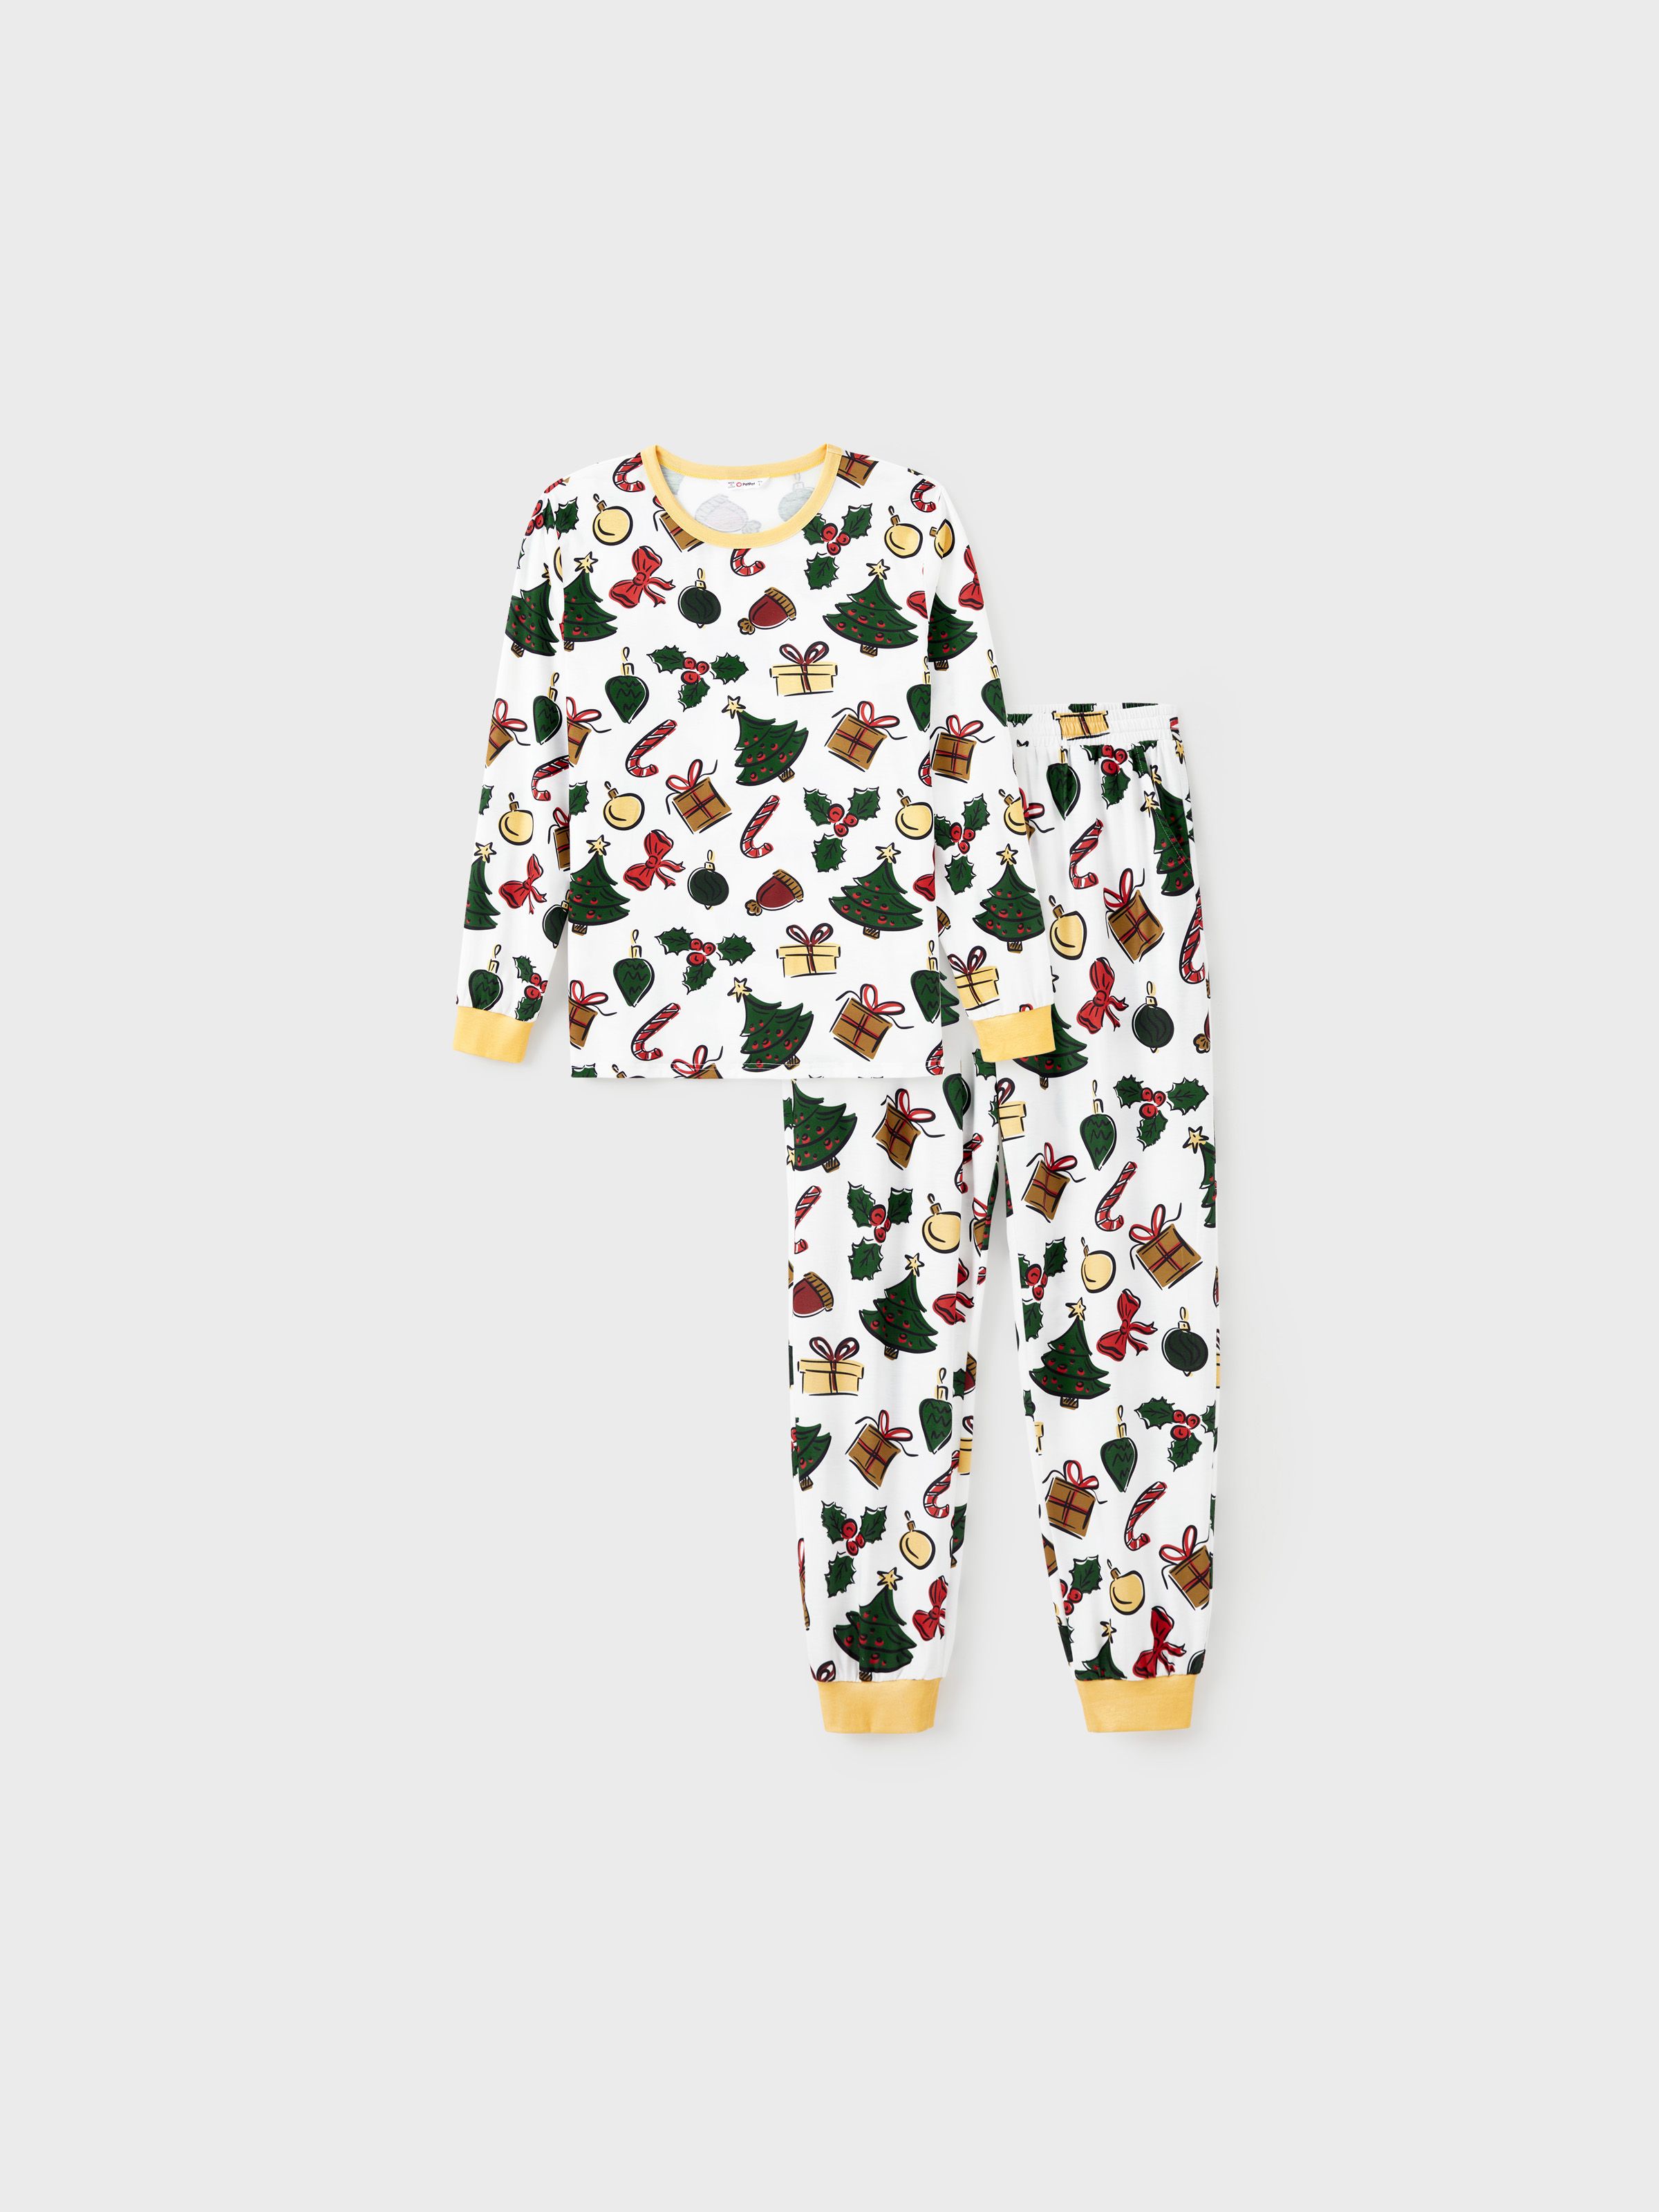 

Christmas Family Matching Allover Christmas-Theme Pattern Pajamas Sets with Drawstring and Pockets (Flame Resistant)